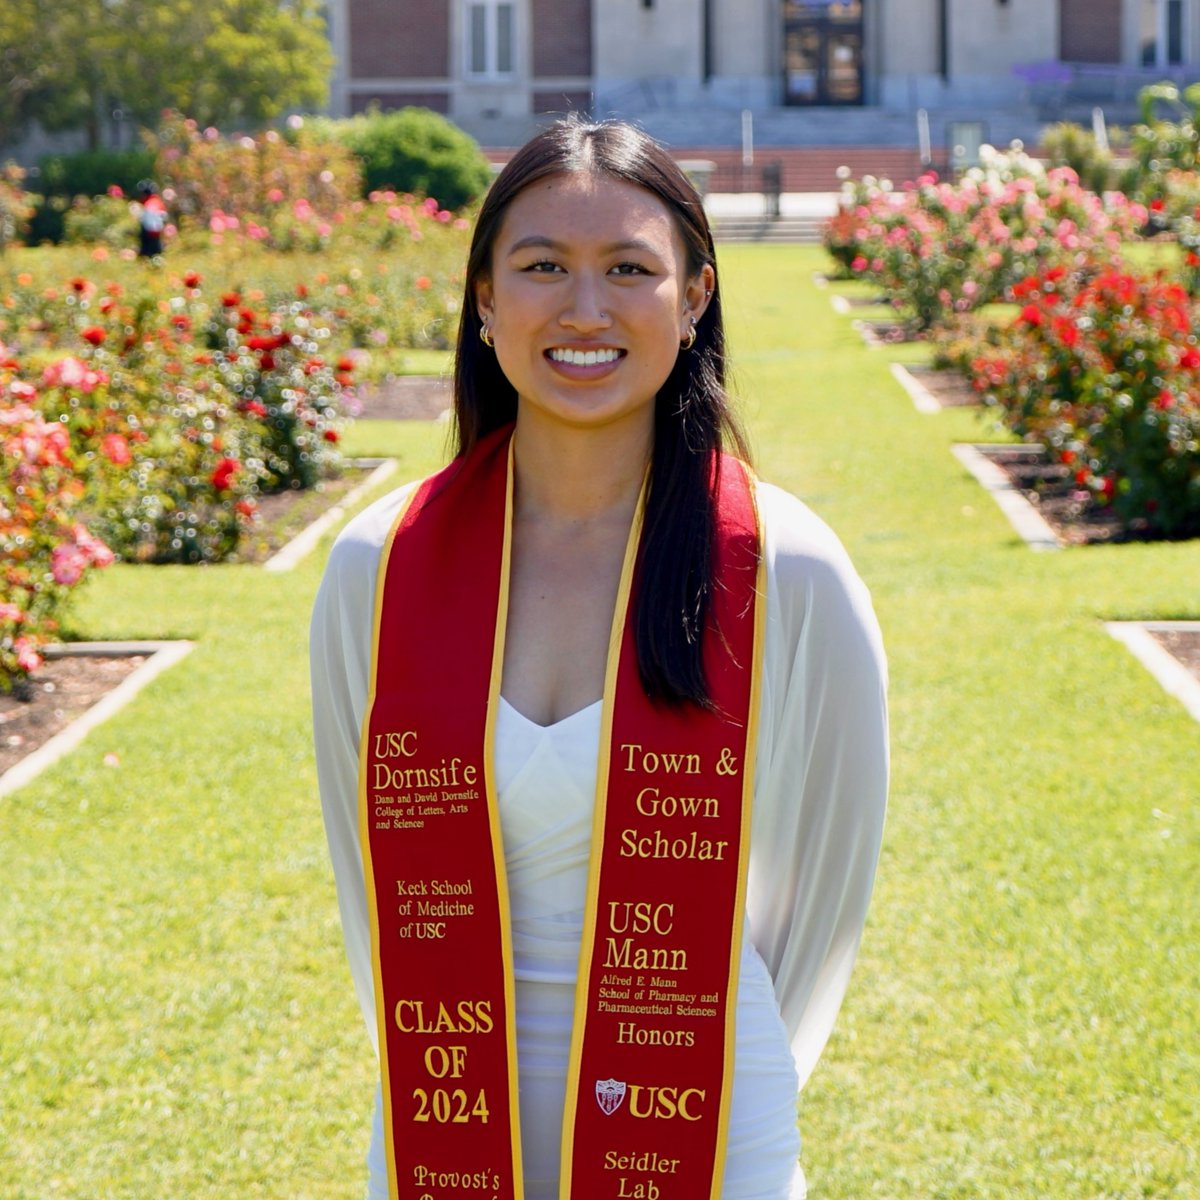 Meet Amanda Tse, who is earning a BS in Pharmacology & Drug Development from #USCMann and a BS in Health Promotion and Disease Prevention Studies from the @KECKSchool_USC: mann.usc.edu/news/commencem…